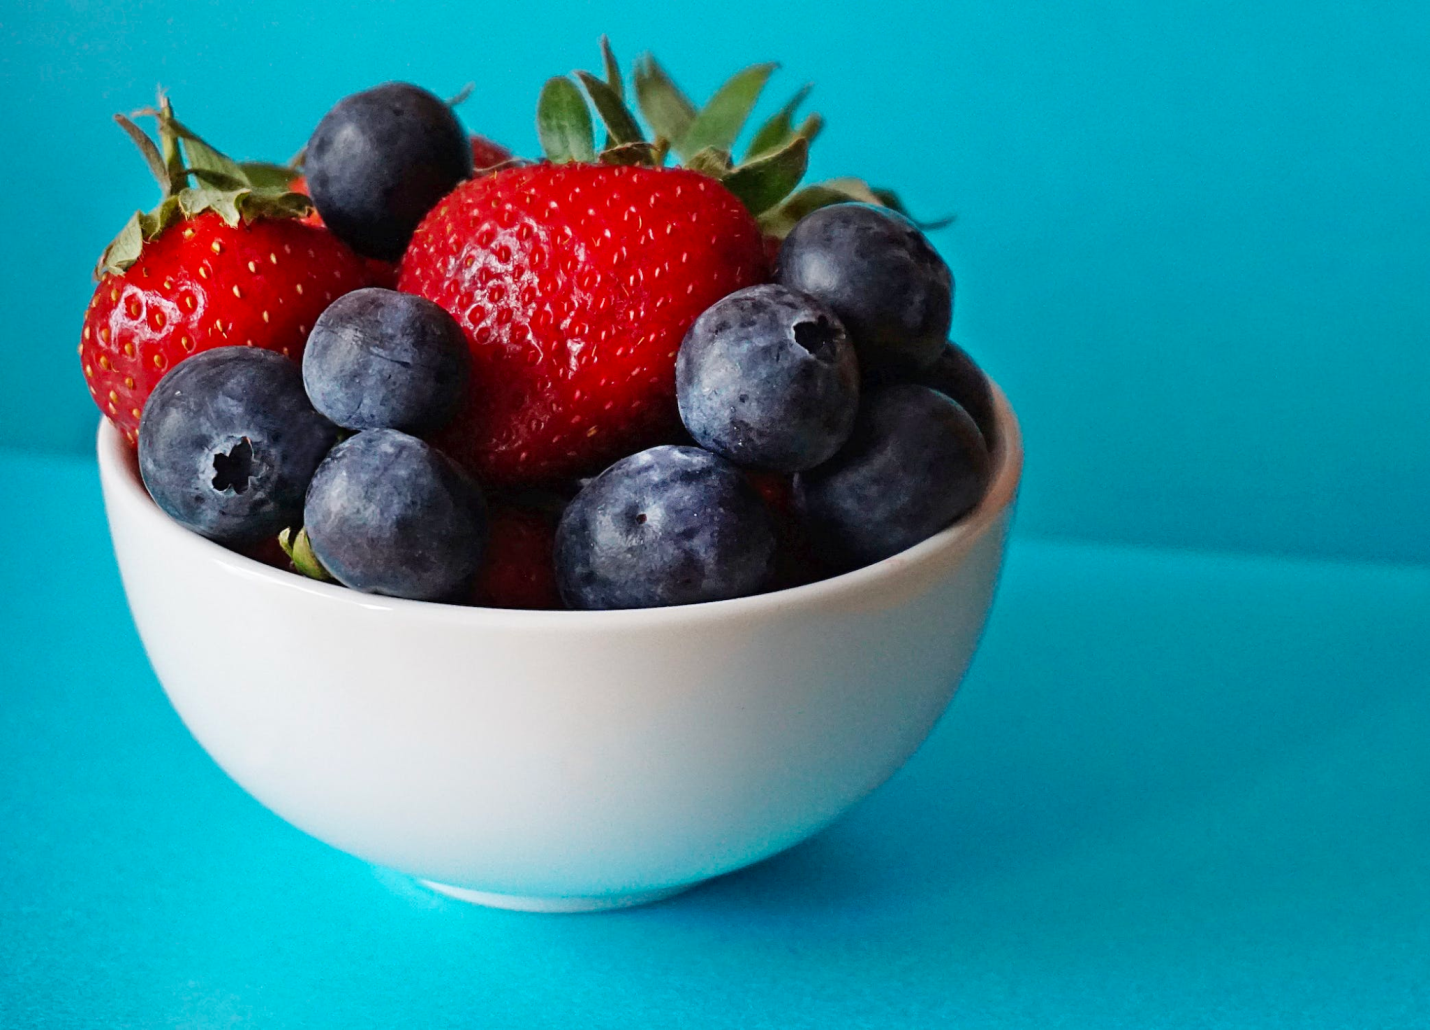 A bowl of various berries, including blueberries and strawberries.